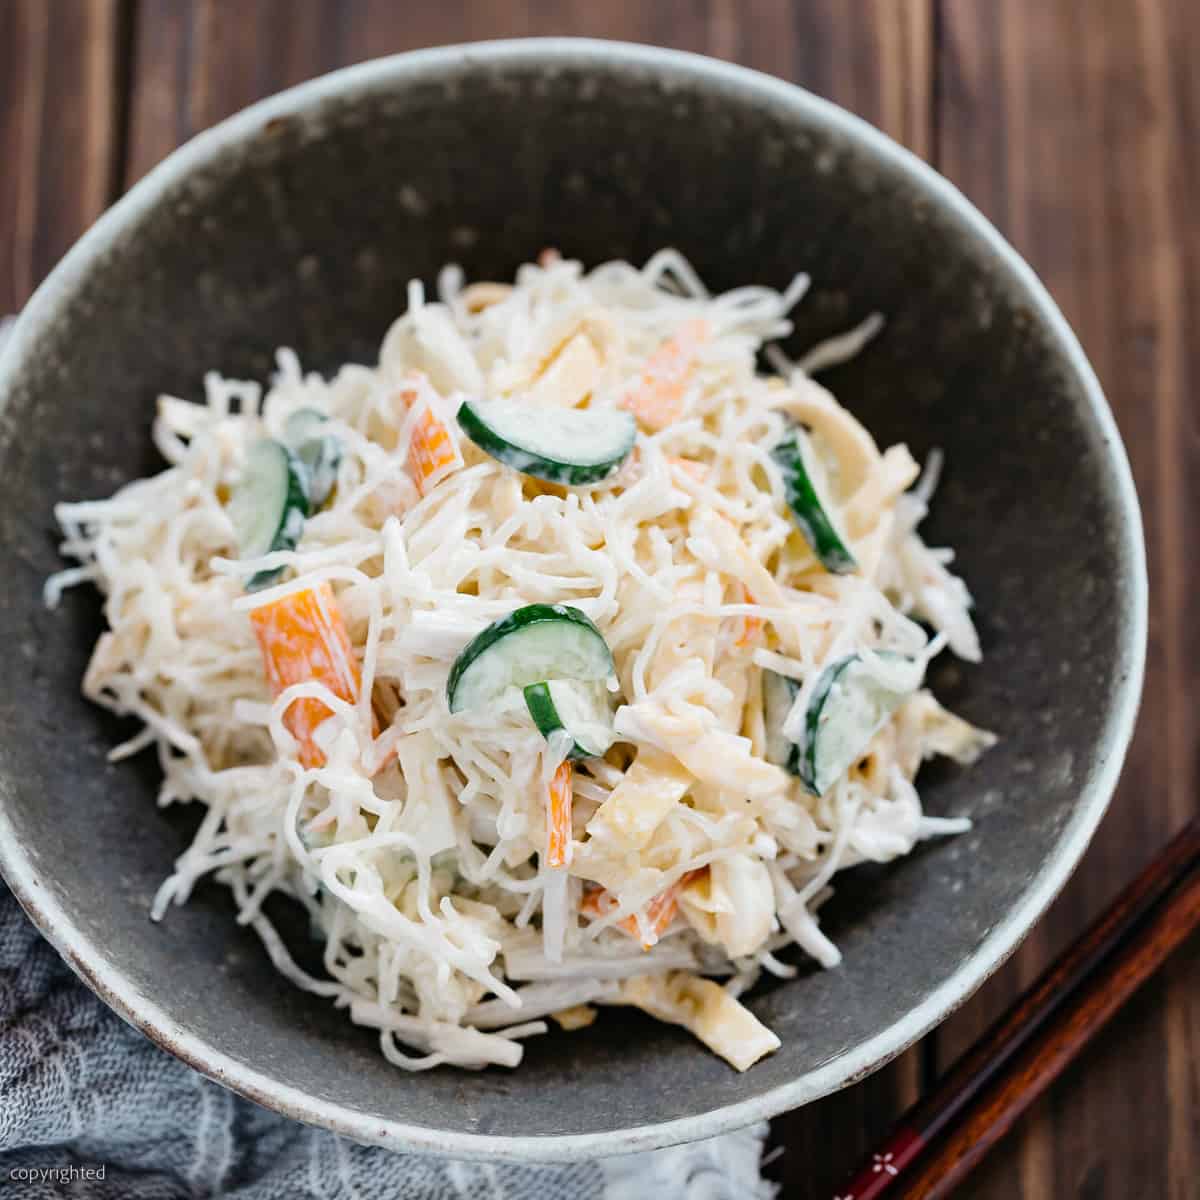 Kelp noodle salad served in a shallow round bowl